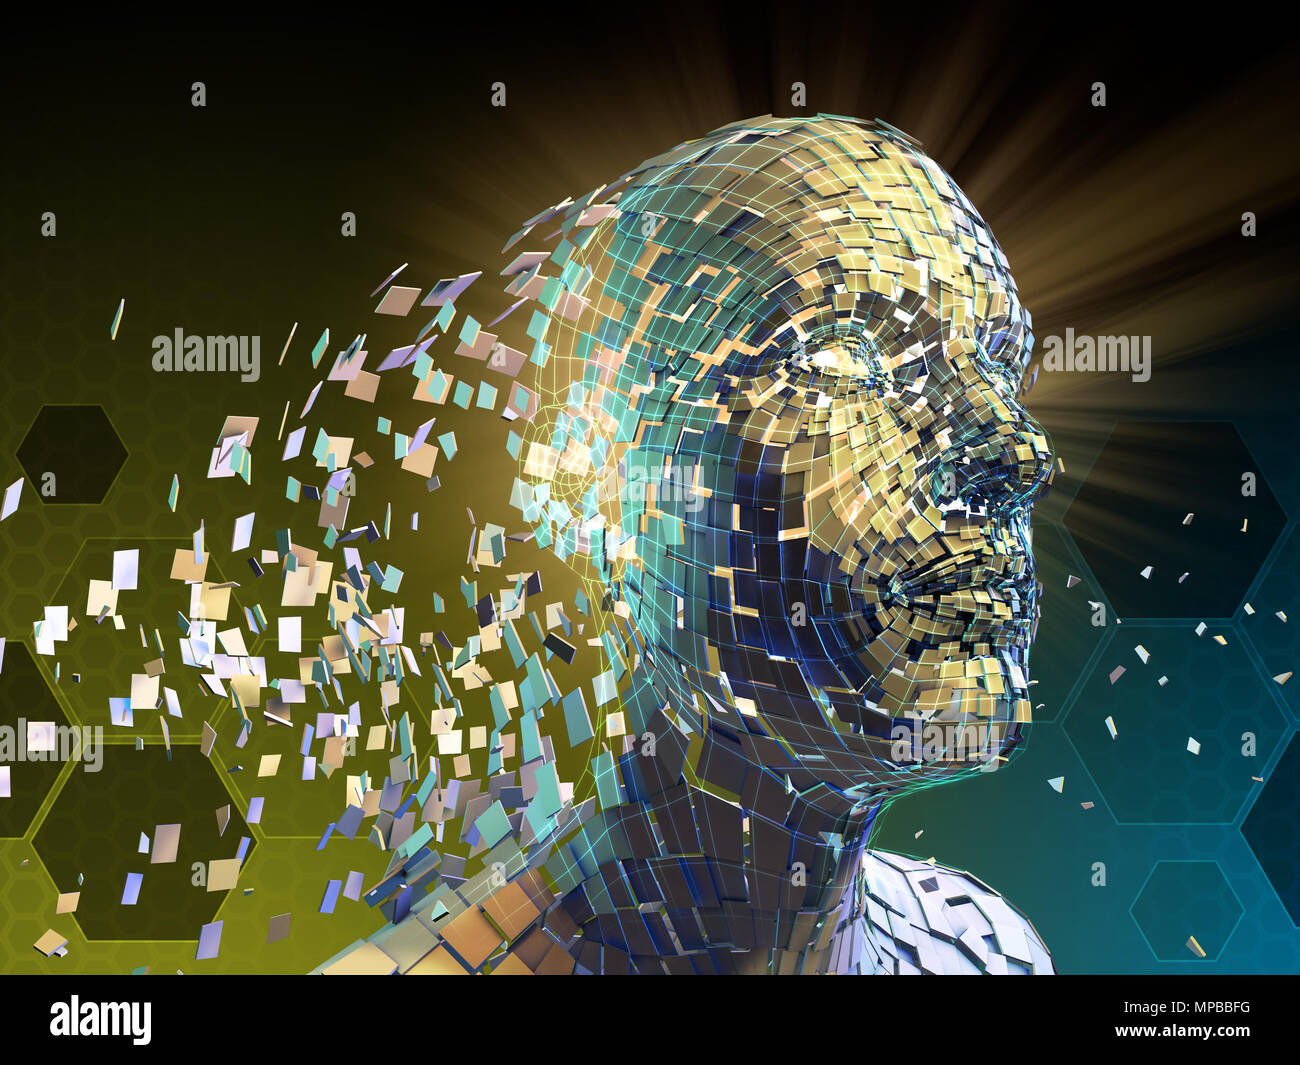 Human head breaking donw into small fragments. 3D illustration. Stock Photo